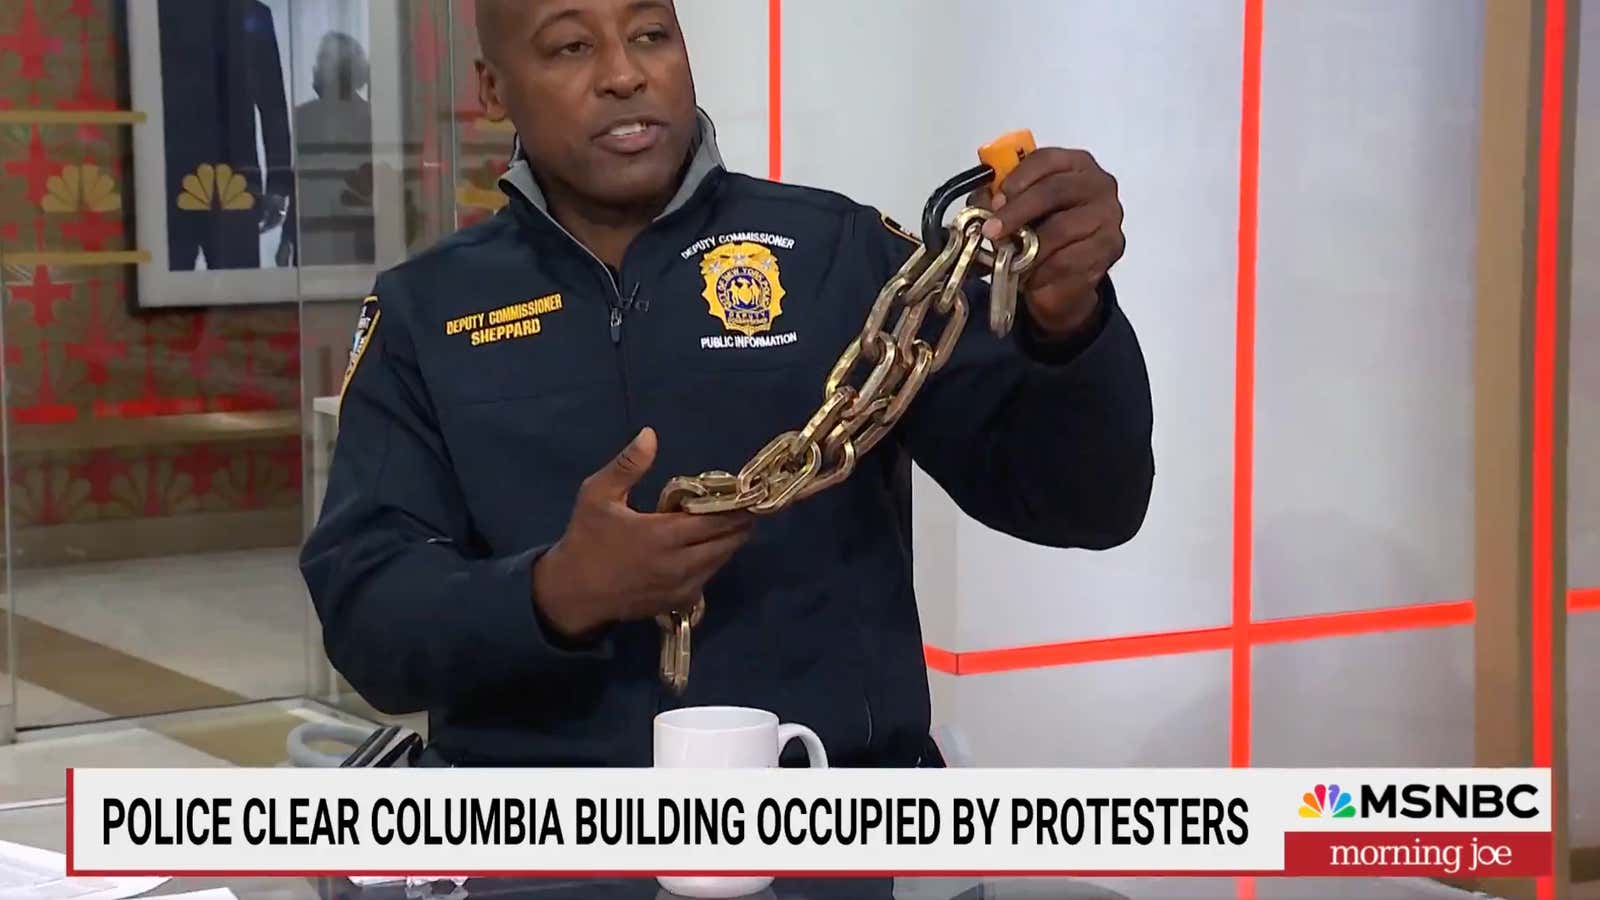 Image for NYPD Claims Bike Chain Sold By Columbia's Public Safety Department Is Proof 'Professionals' Are Behind Campus Protests